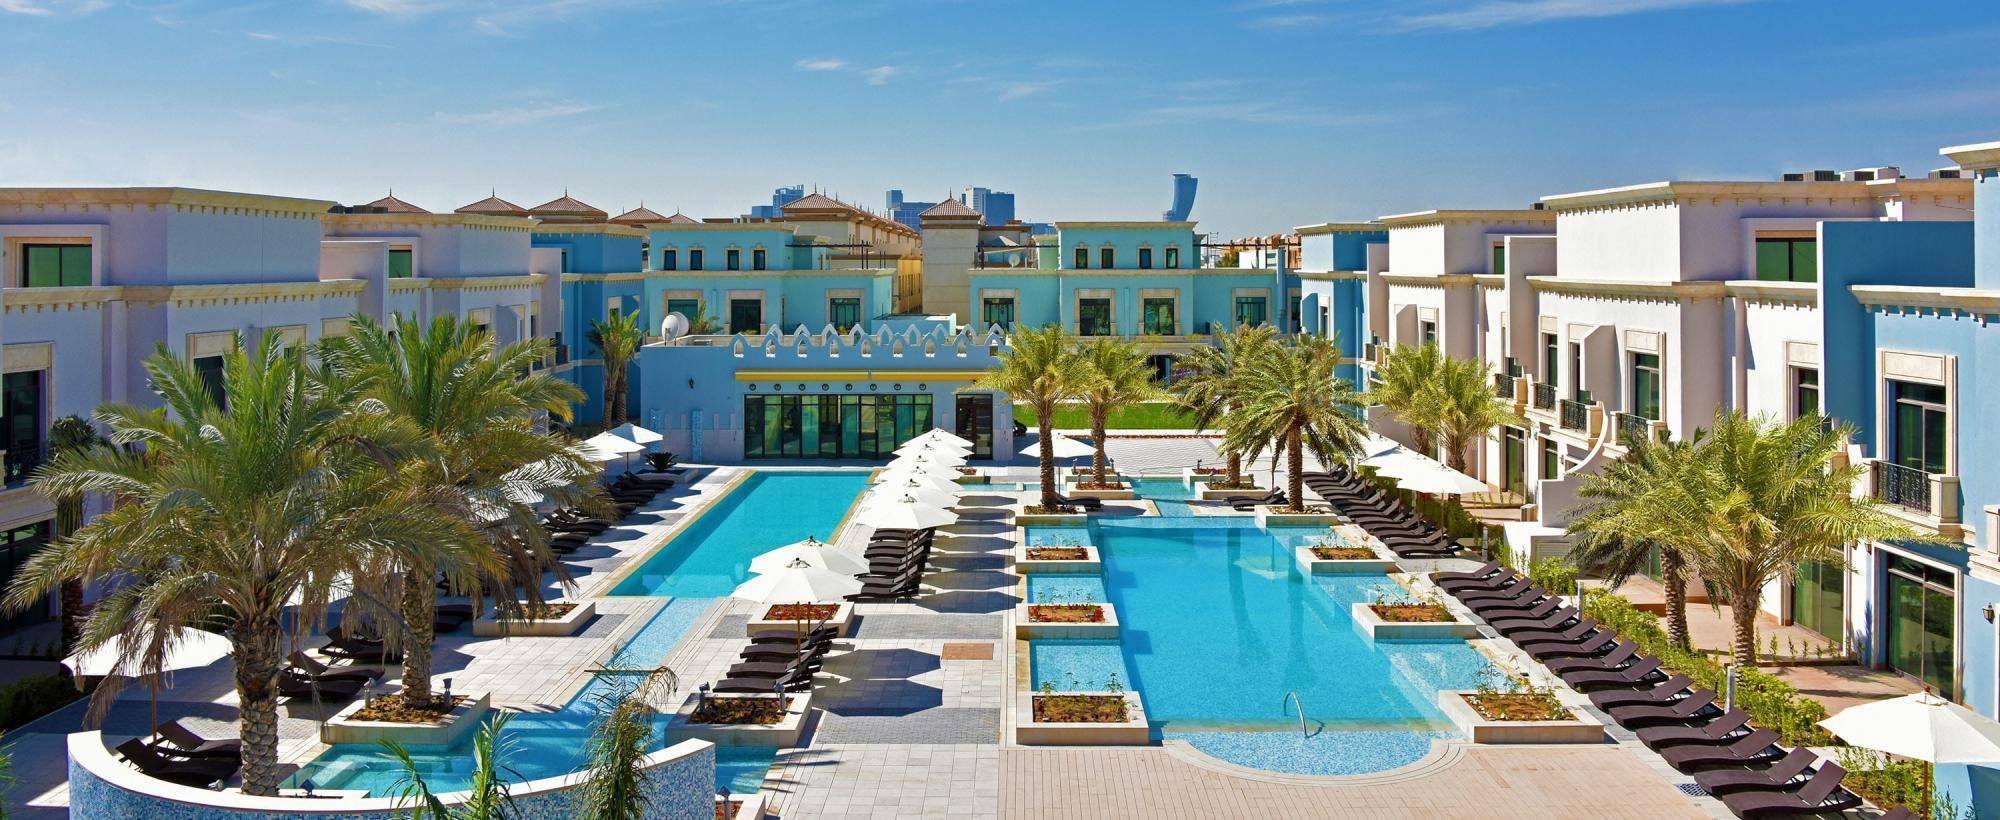 Andalus Al Seef Resort & Spa - Other